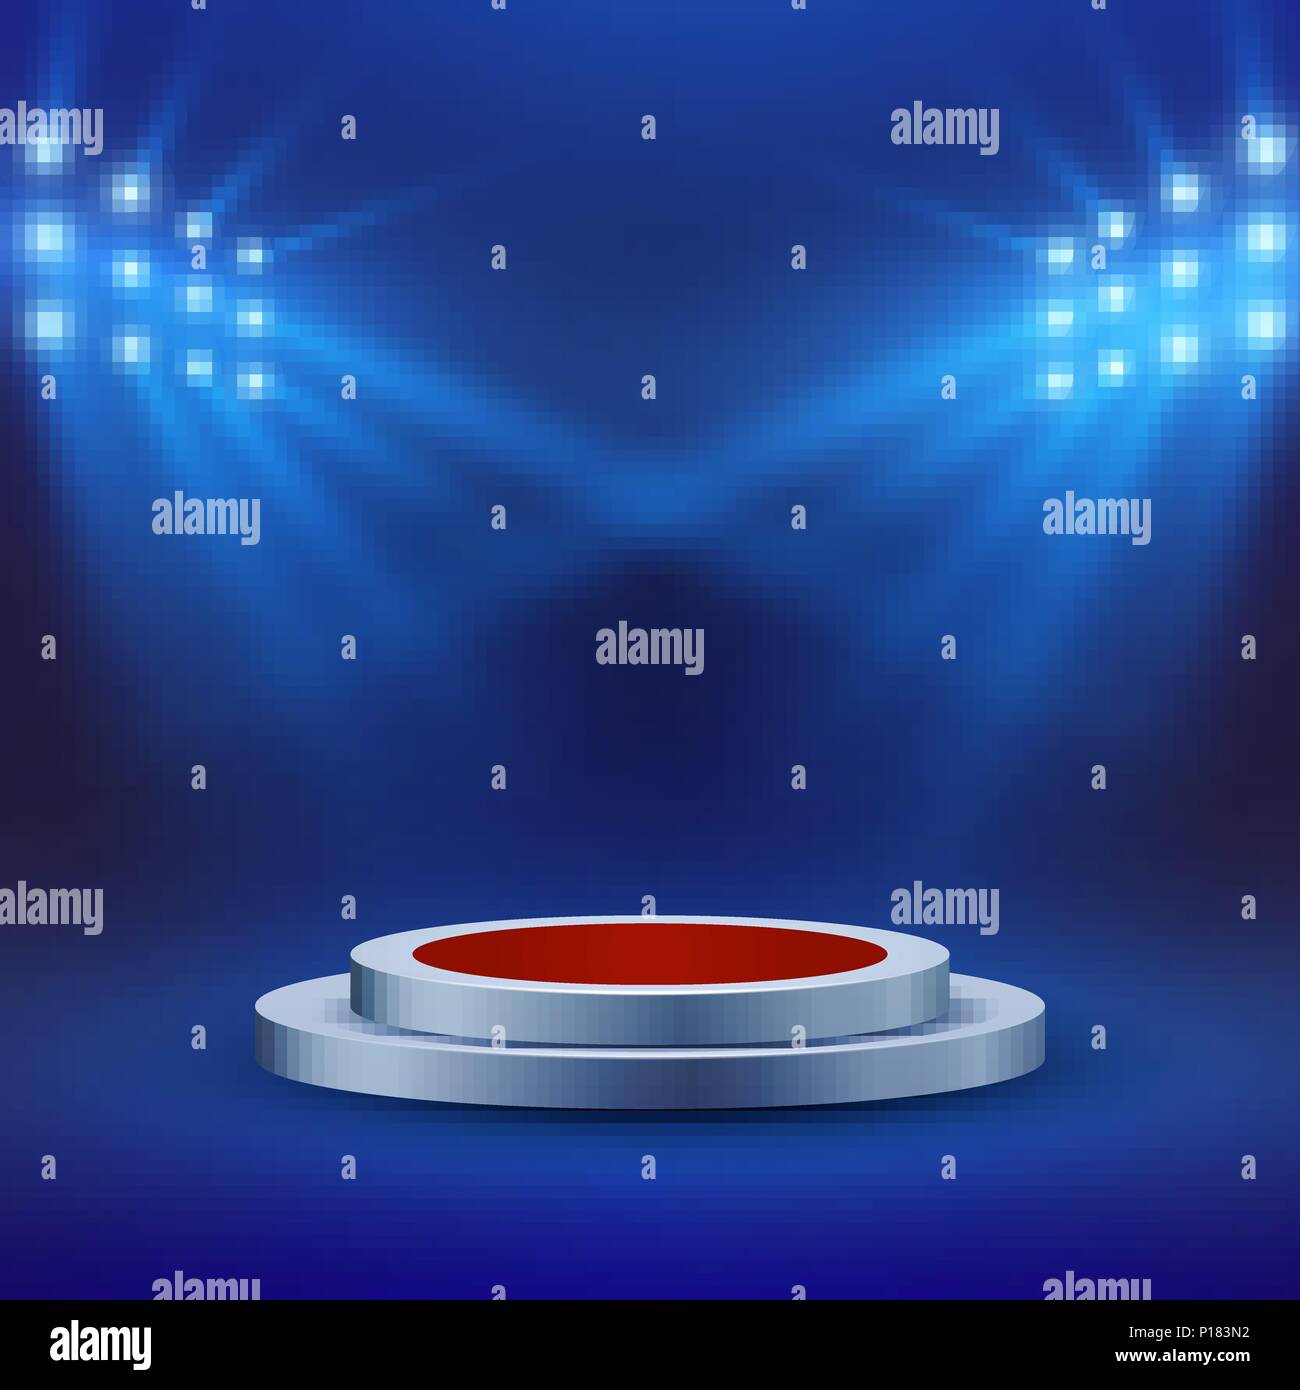 Stage with red carpet and spotlight on blue background. Concert arena or scene. Empty podium. Vector illustration Stock Vector